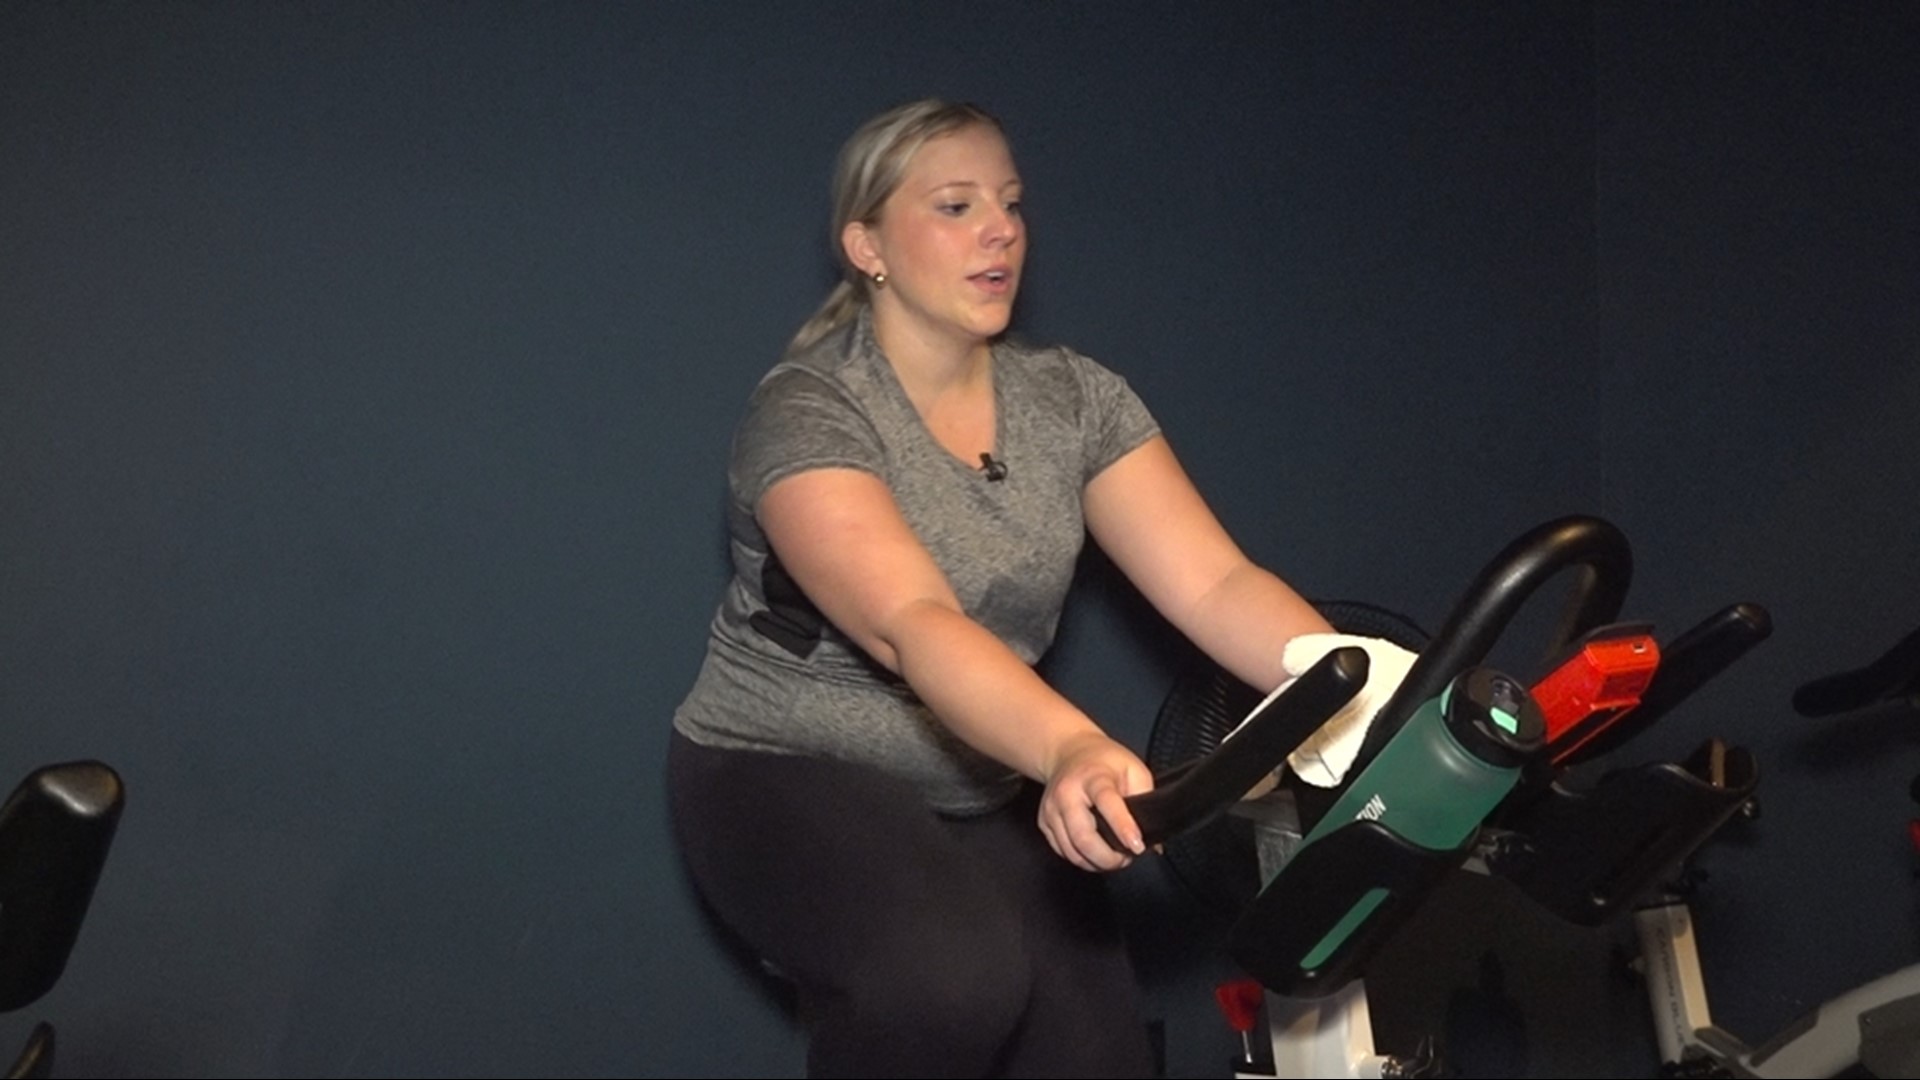 Test your endurance and burn some calories during H2L's cycling classes!